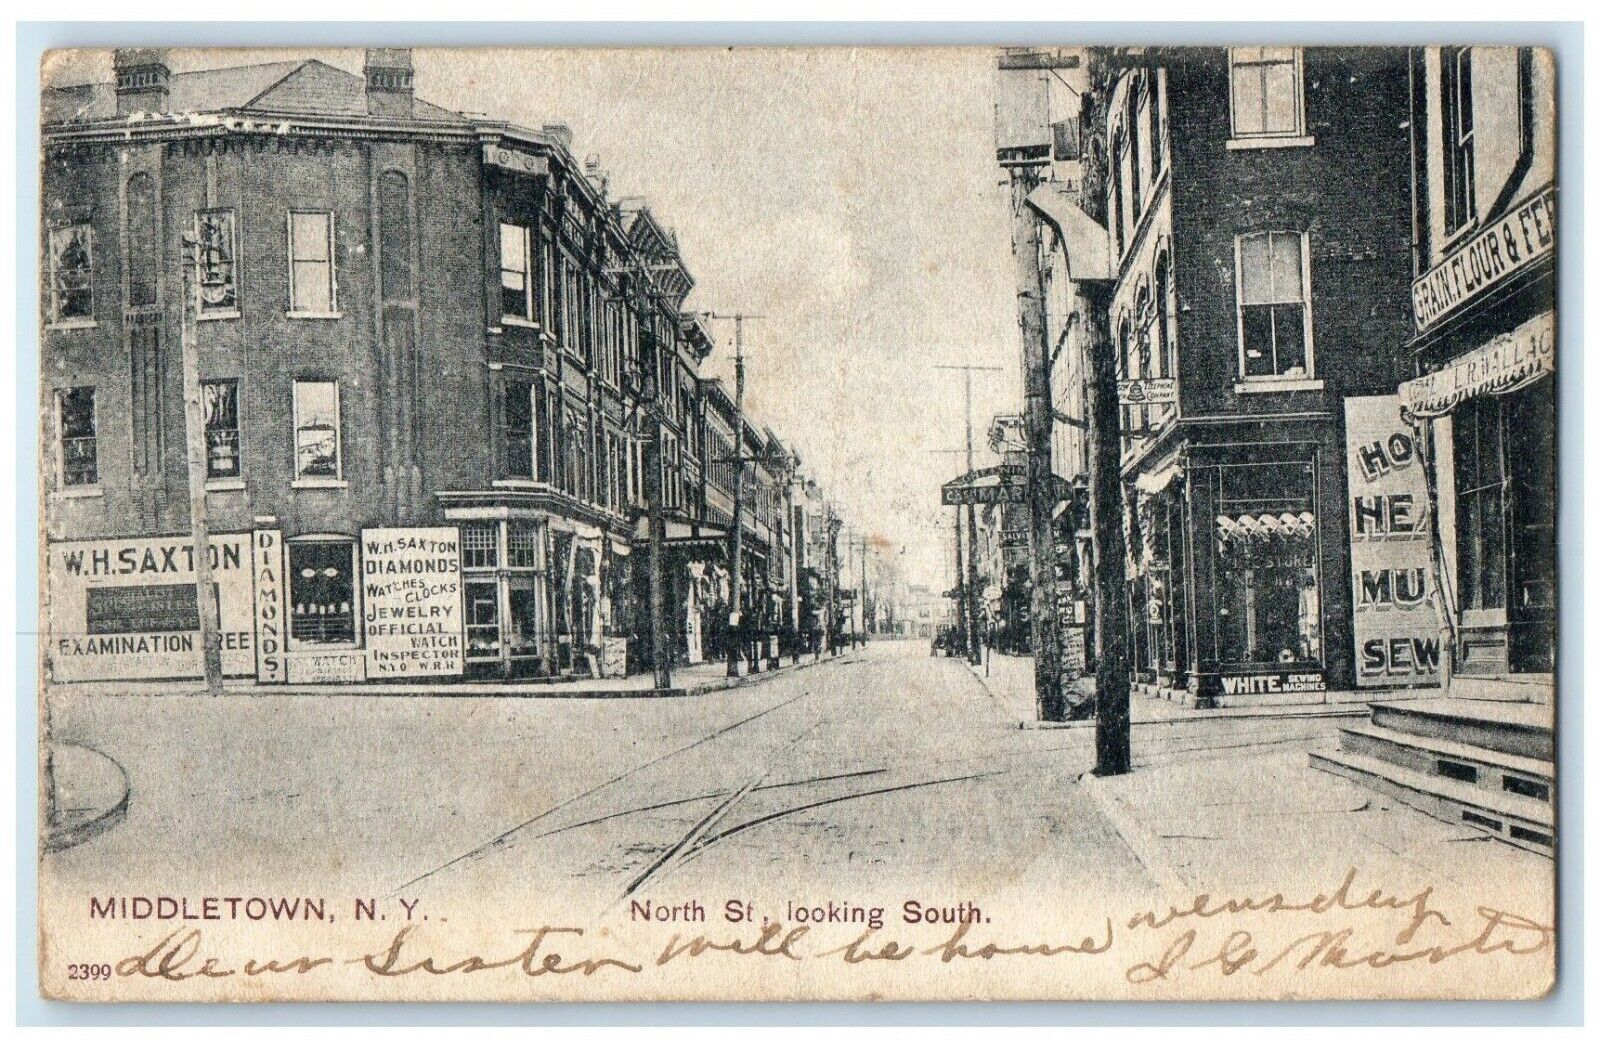 1906 North St Looking South Buildings Road Middletown New York Vintage Postcard